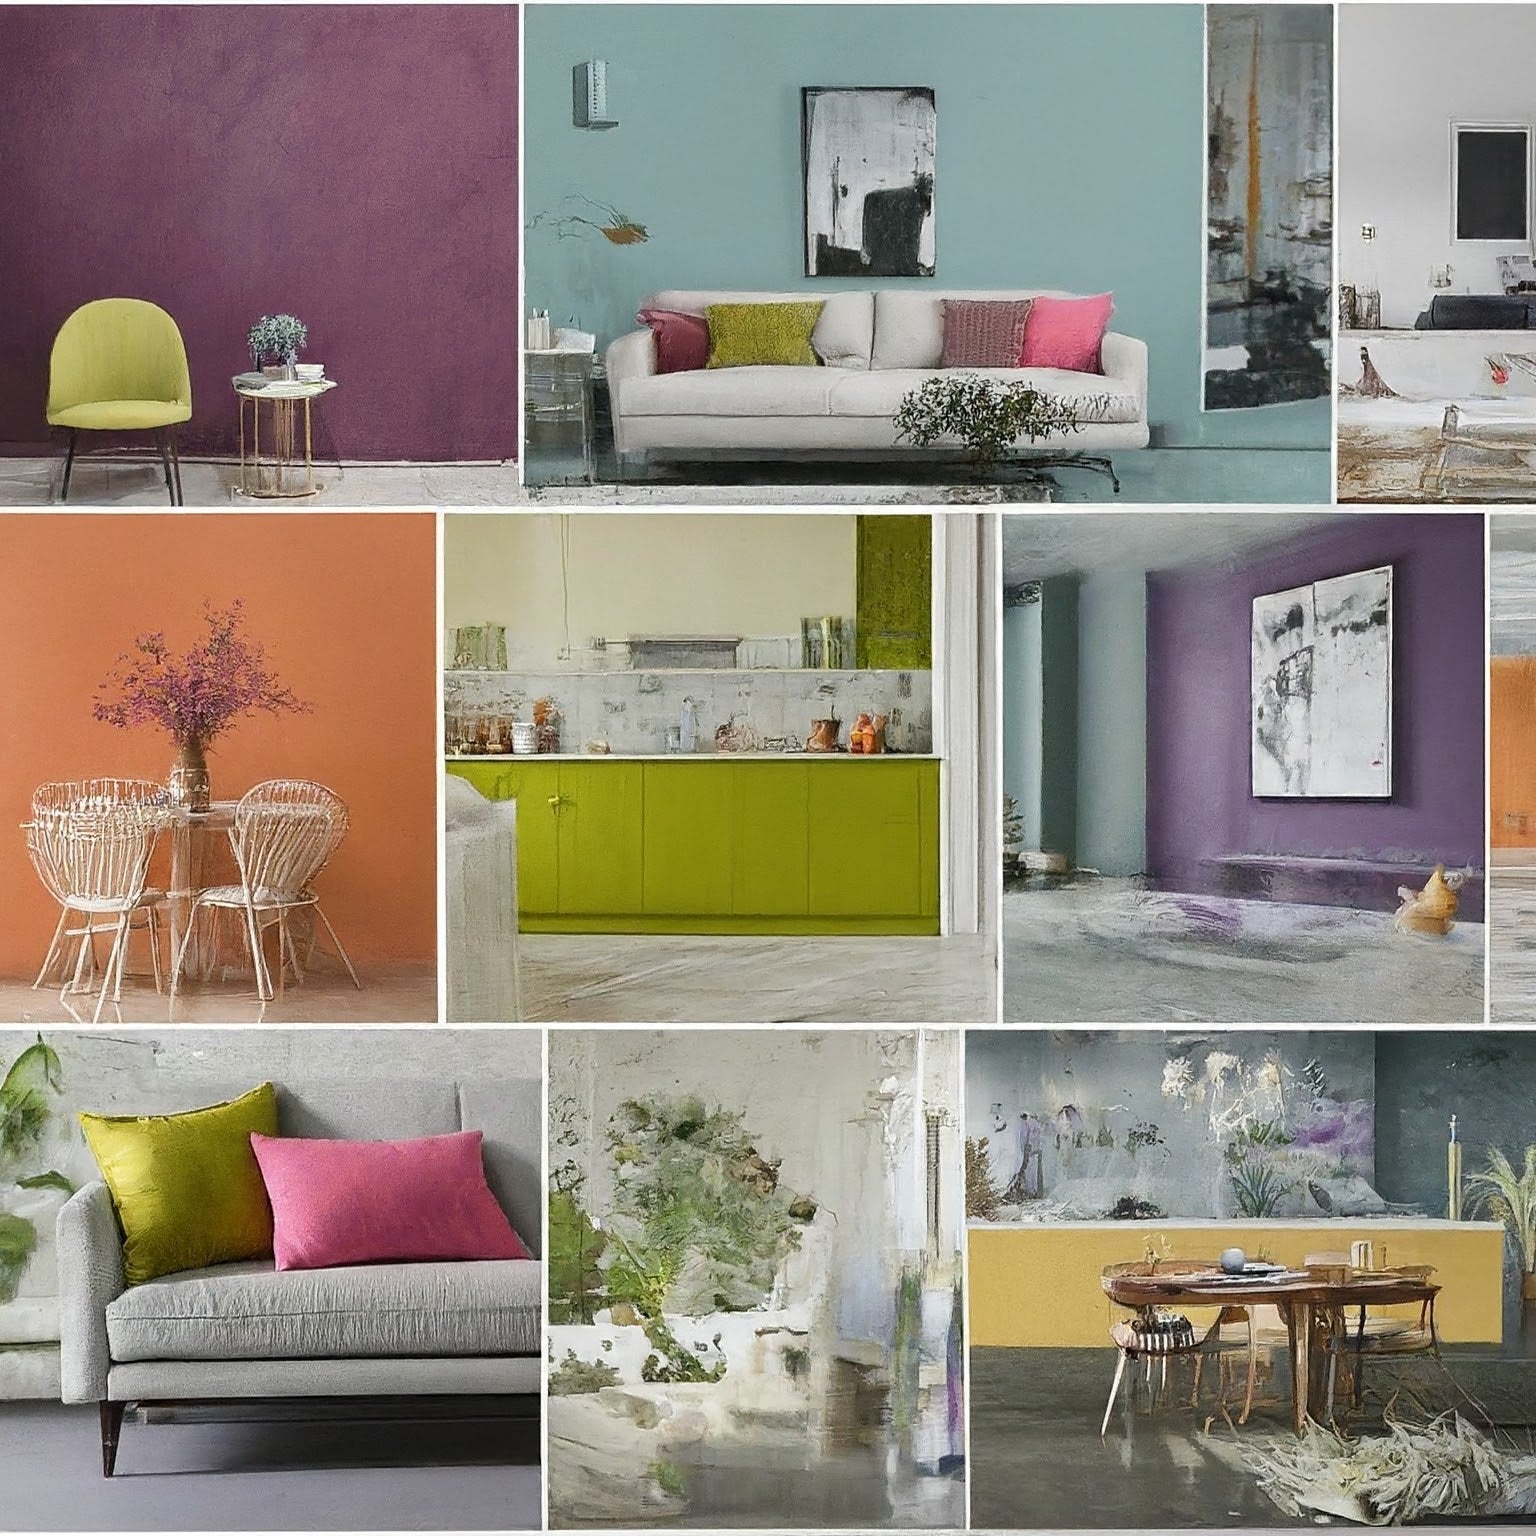 Top 5 Summer Color Palettes to Brighten Up Your Home